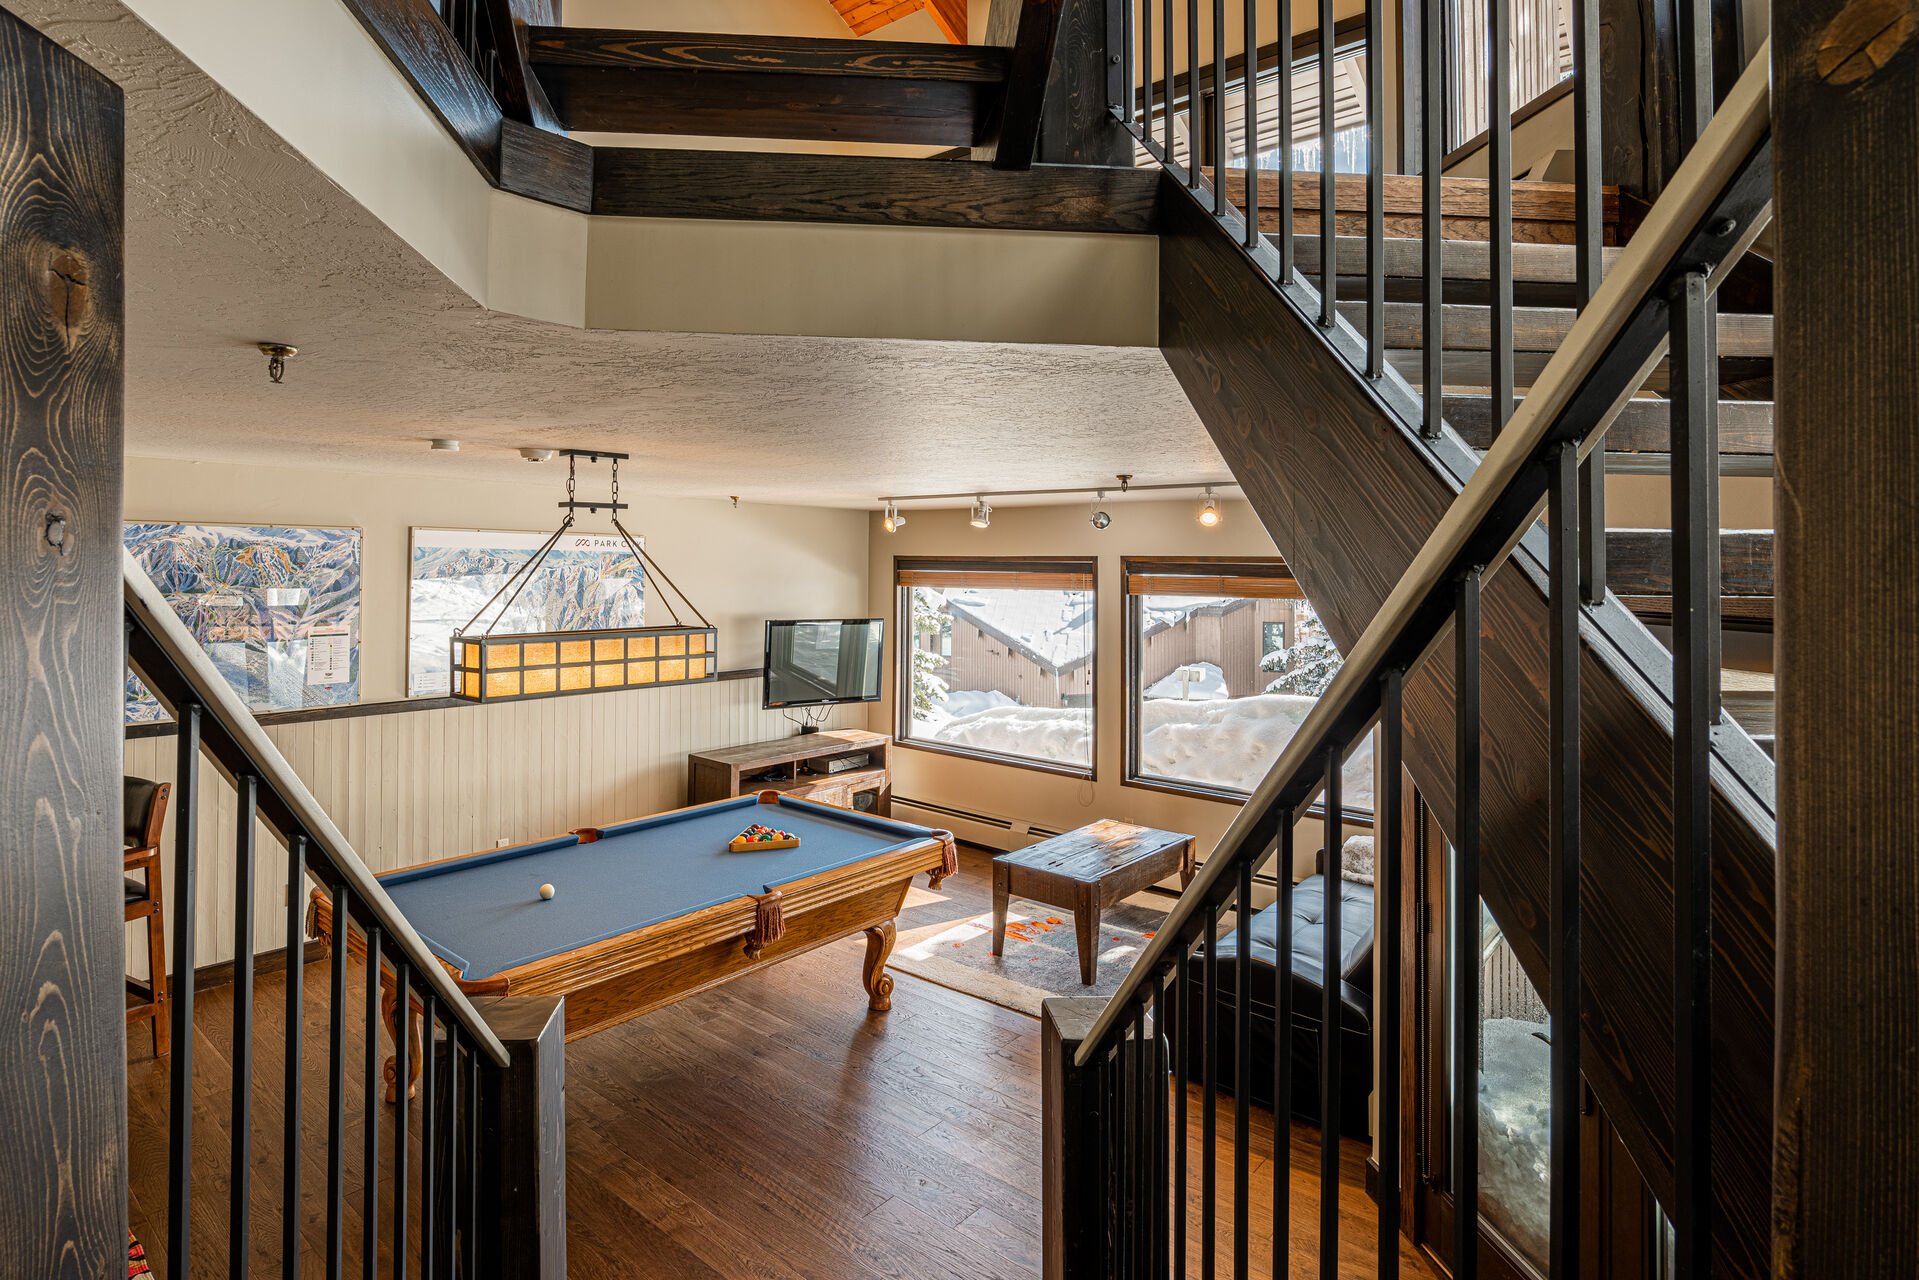 Lower Level Game Room with Pool Table, TV, and Futon